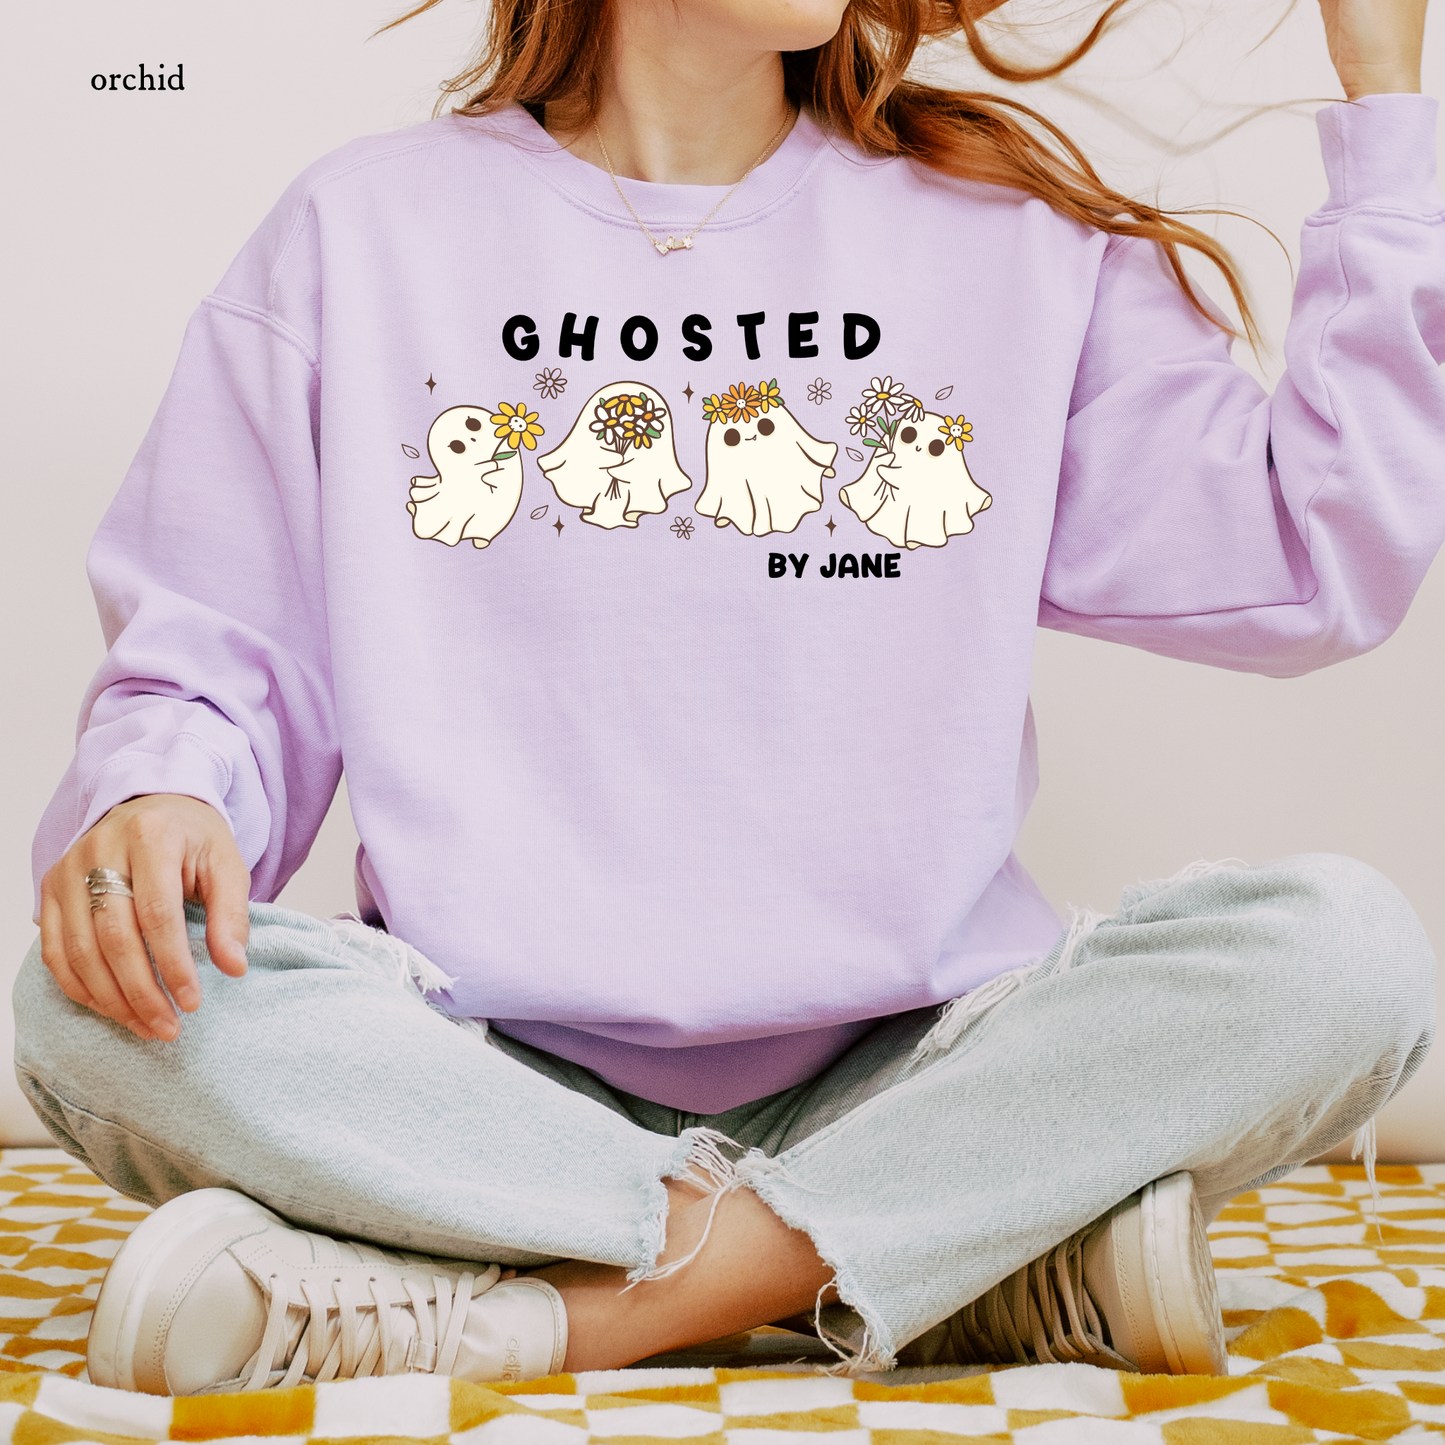 Ghosted by Jane |Comfort Color Sweatshirts